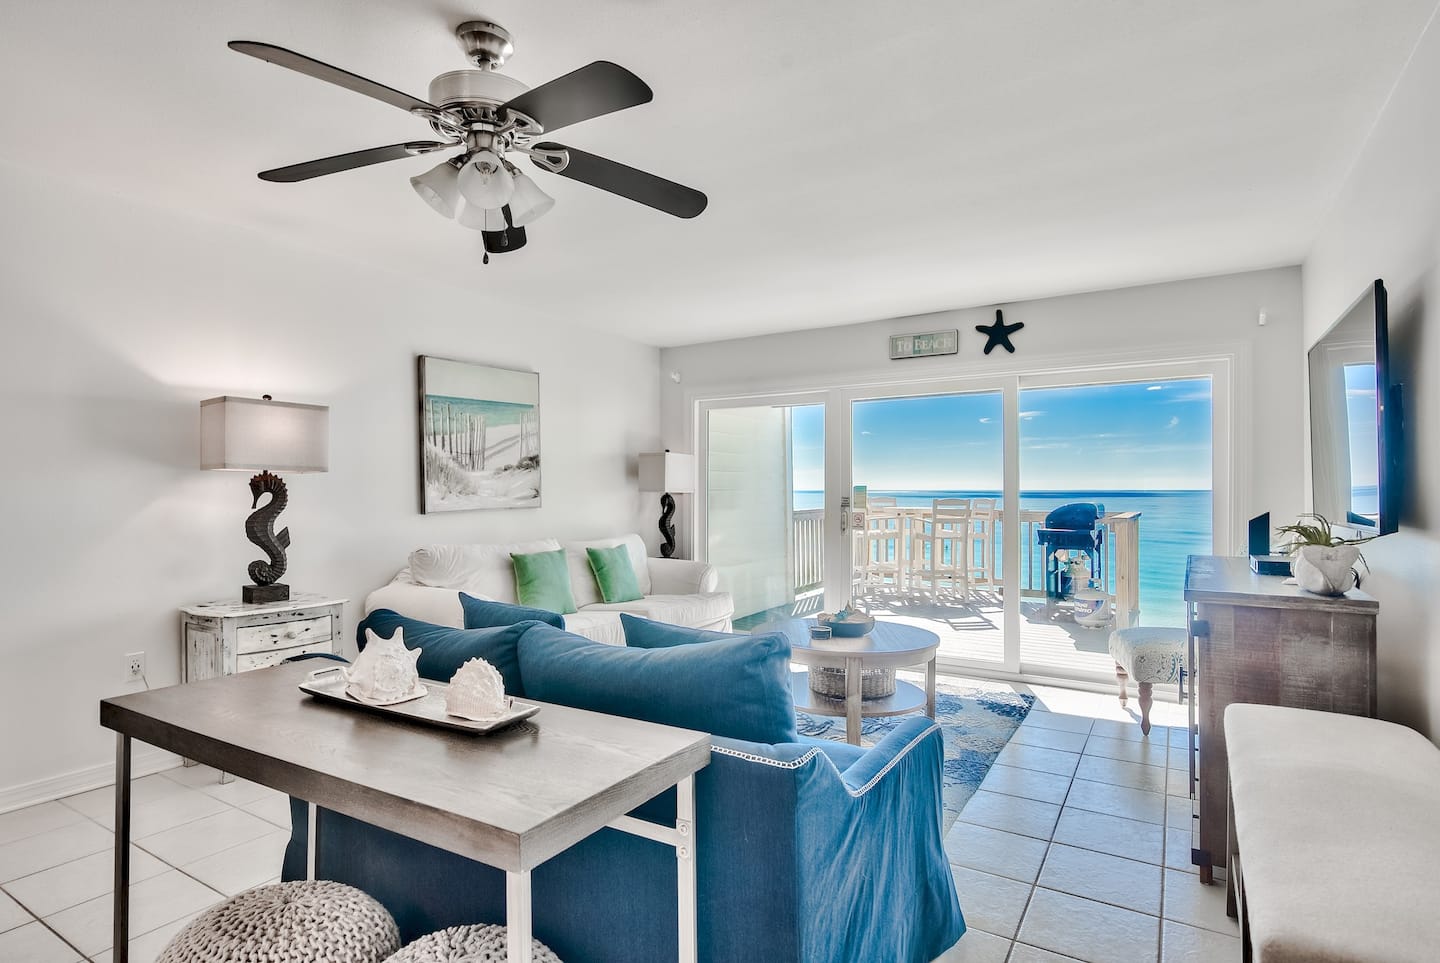 Waterside Dreams Beachfront Condo, one of the best Airbnbs in Destin Florida